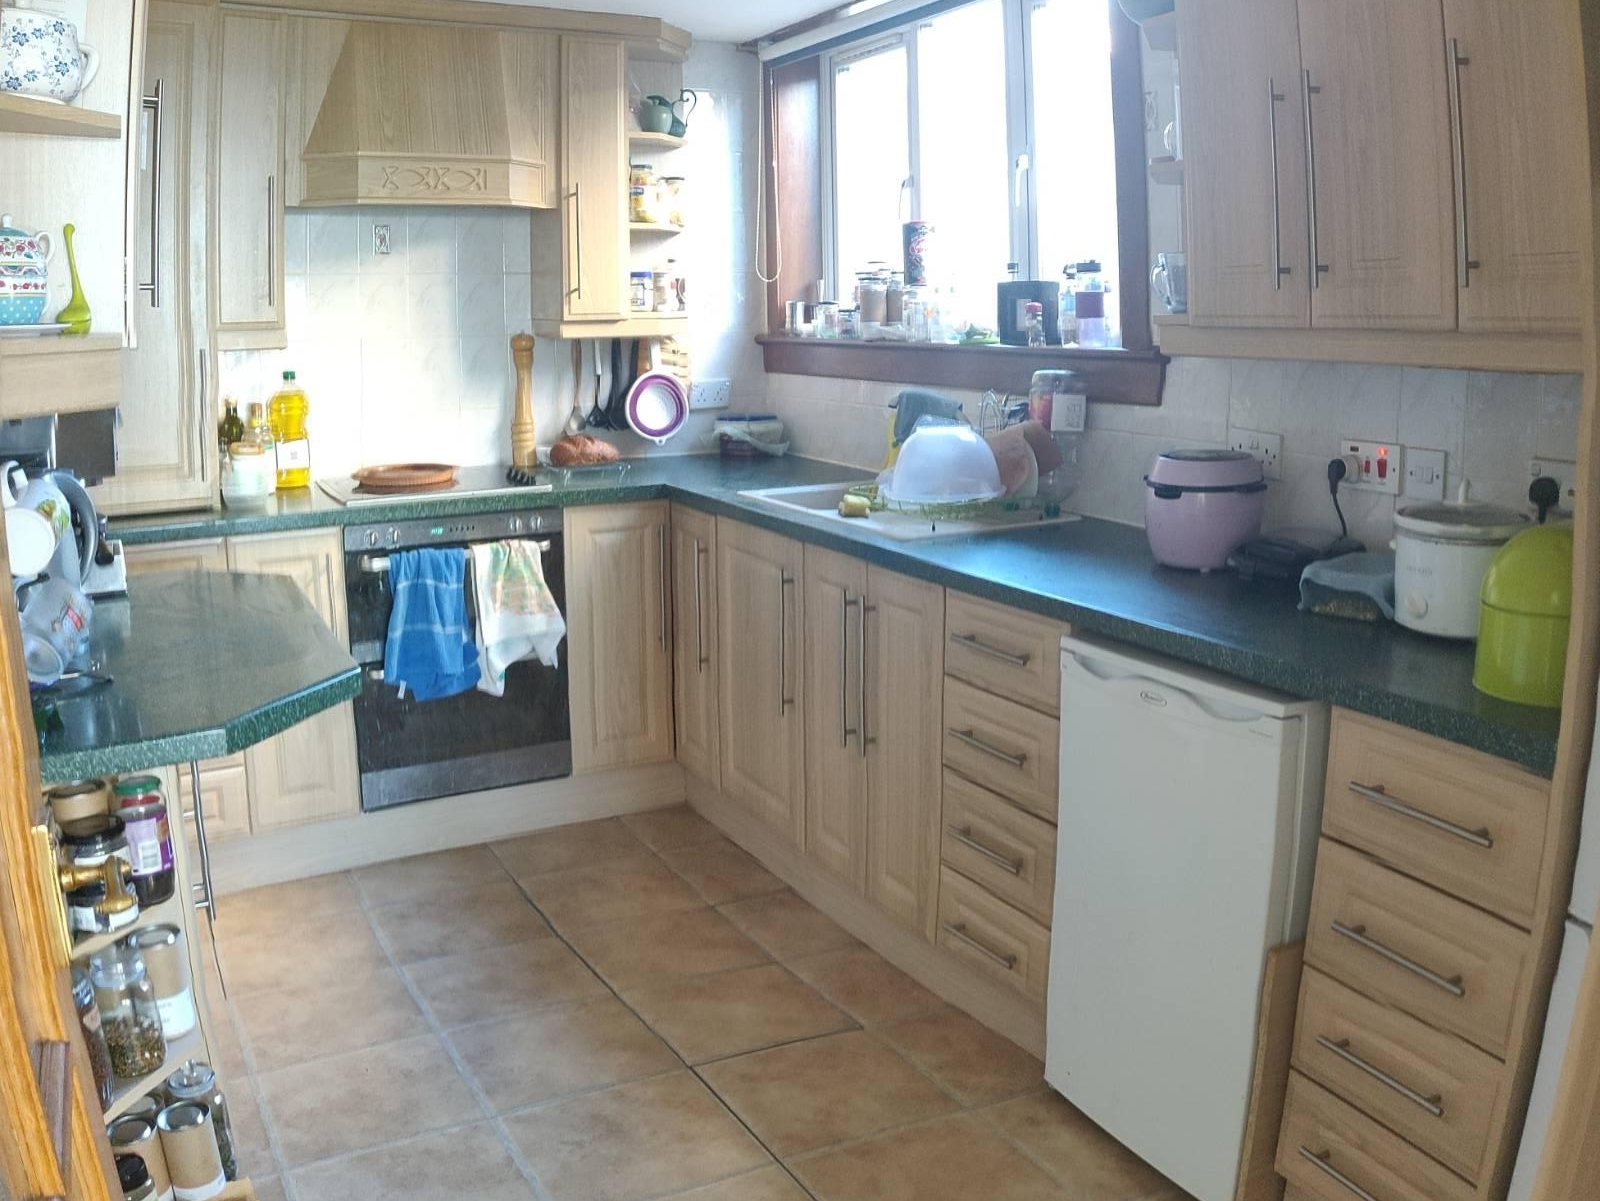 After: A kitchen with green worktops, wood-effect cupboards, shelves full of tea and spaces, utensils hanging